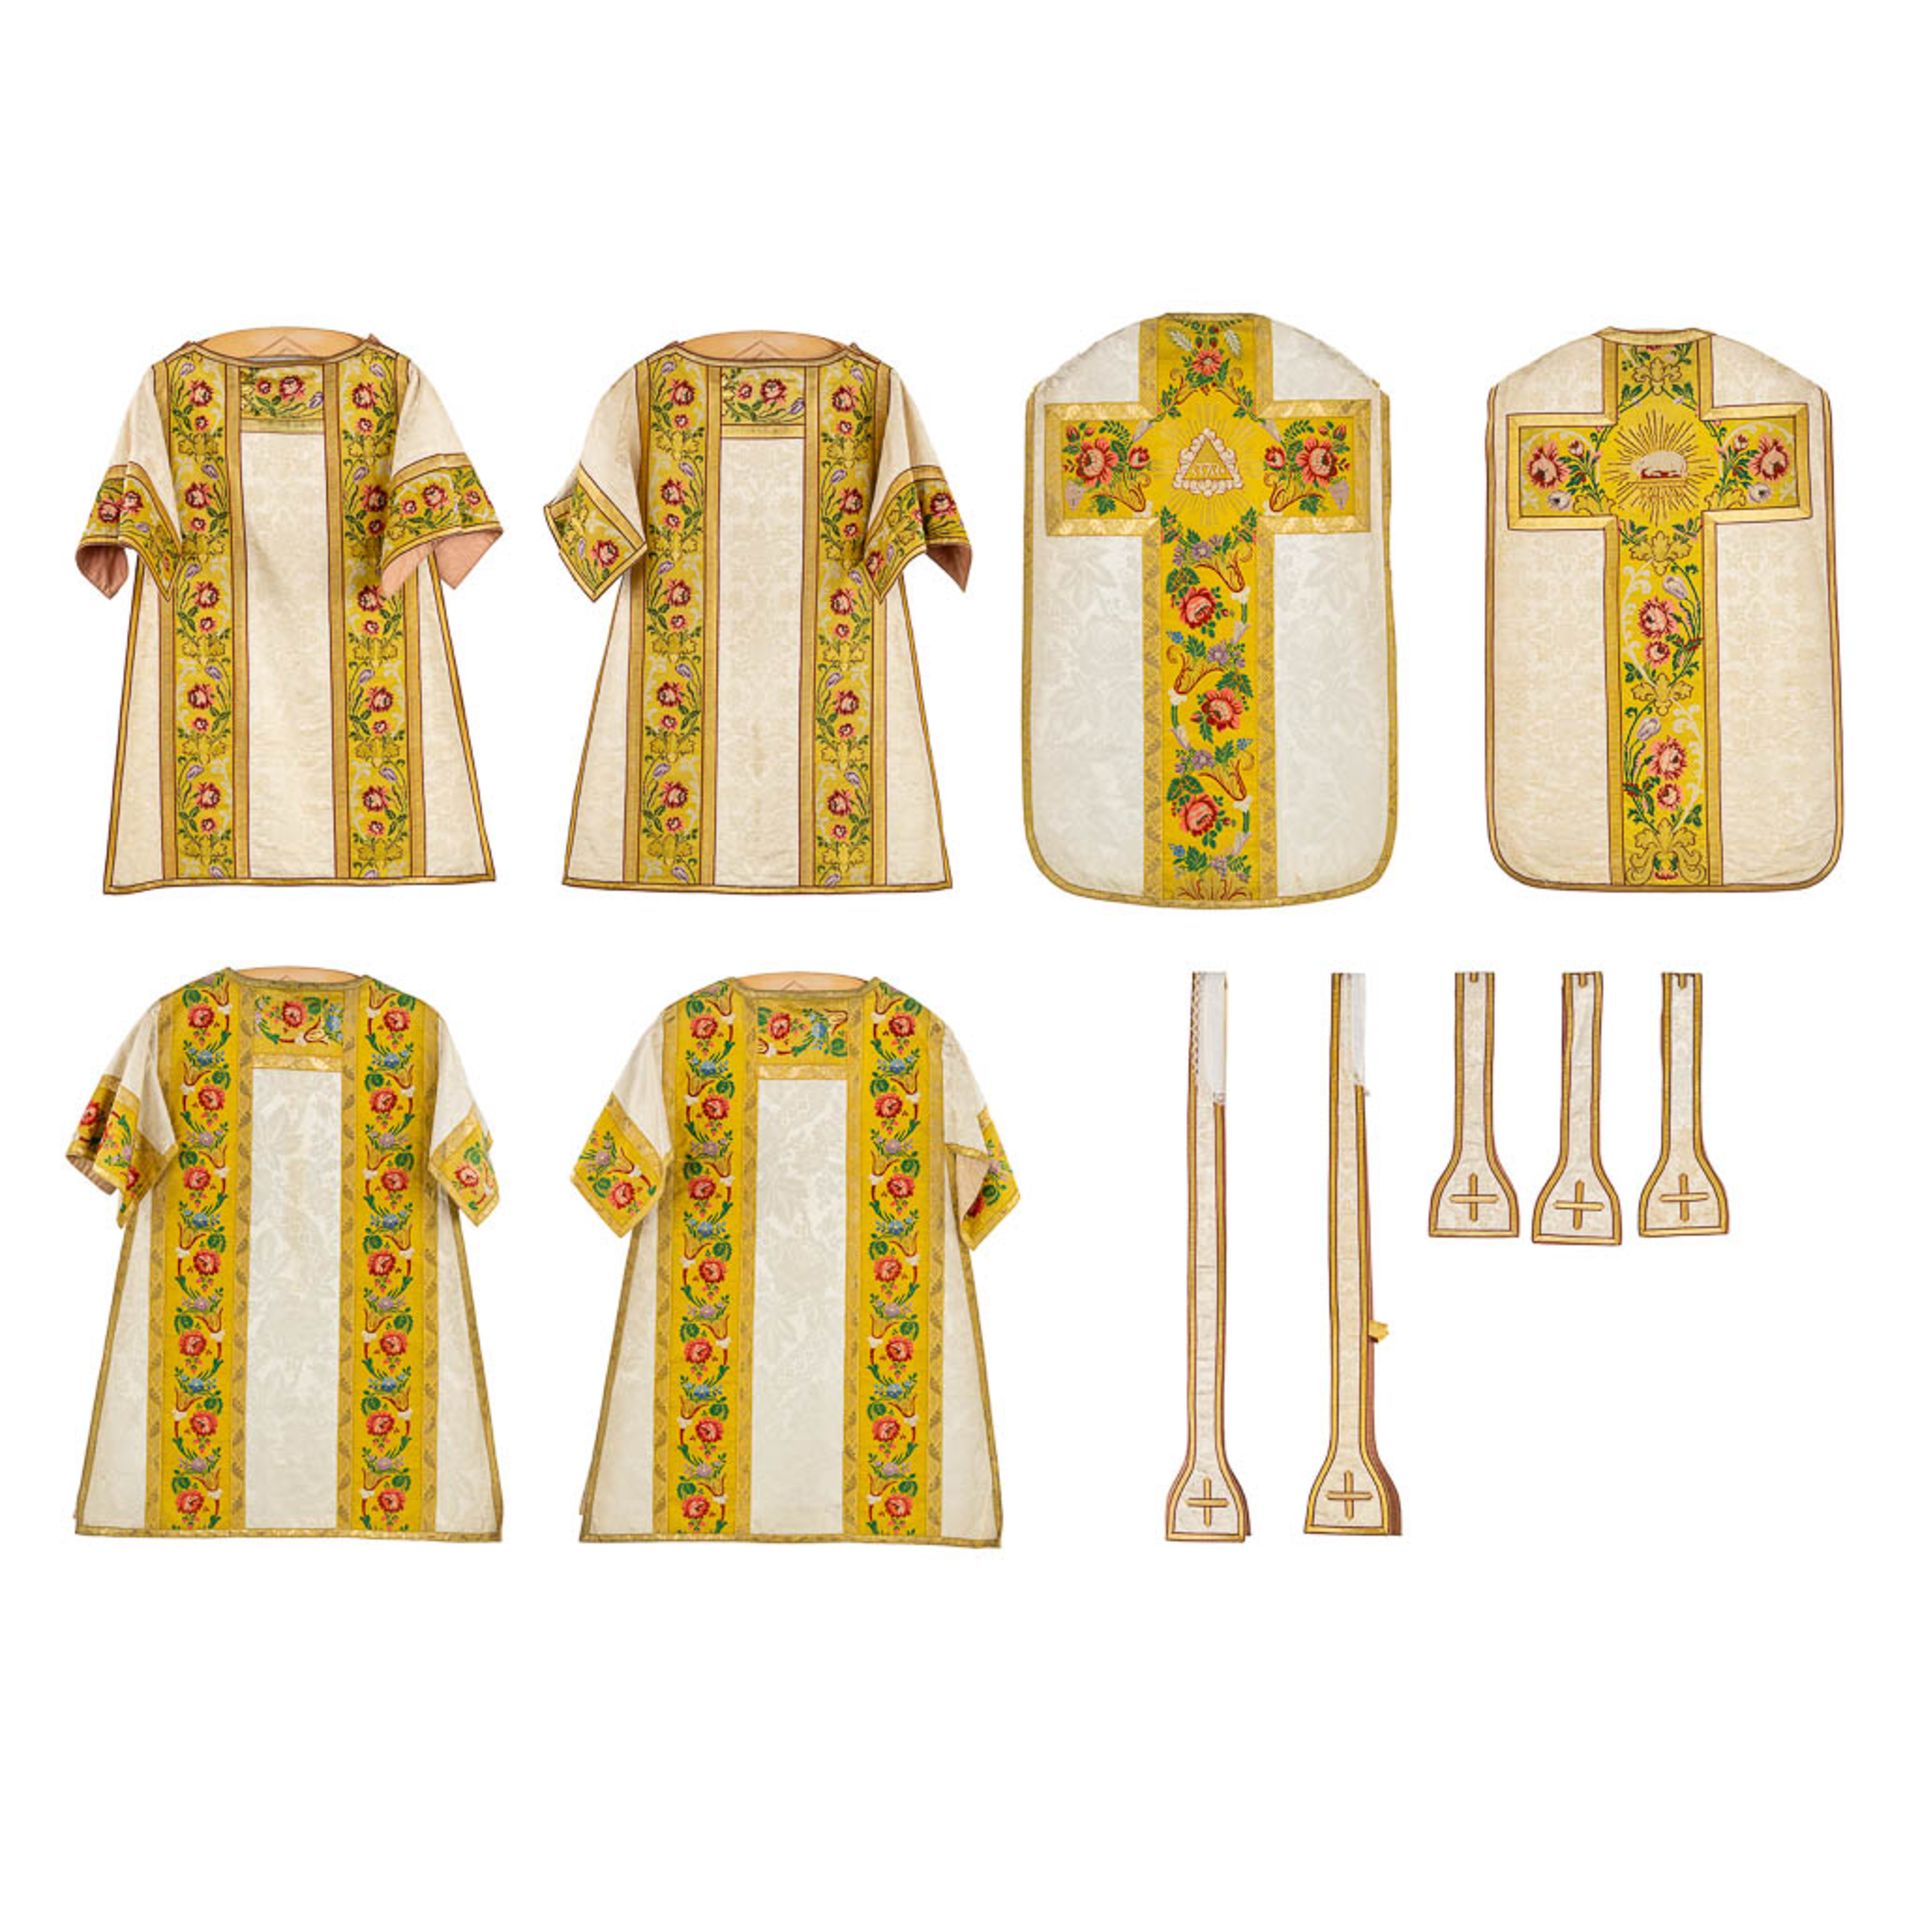 Four Dalmatics and two Roman Chasubles, Embroideries with floral decors.